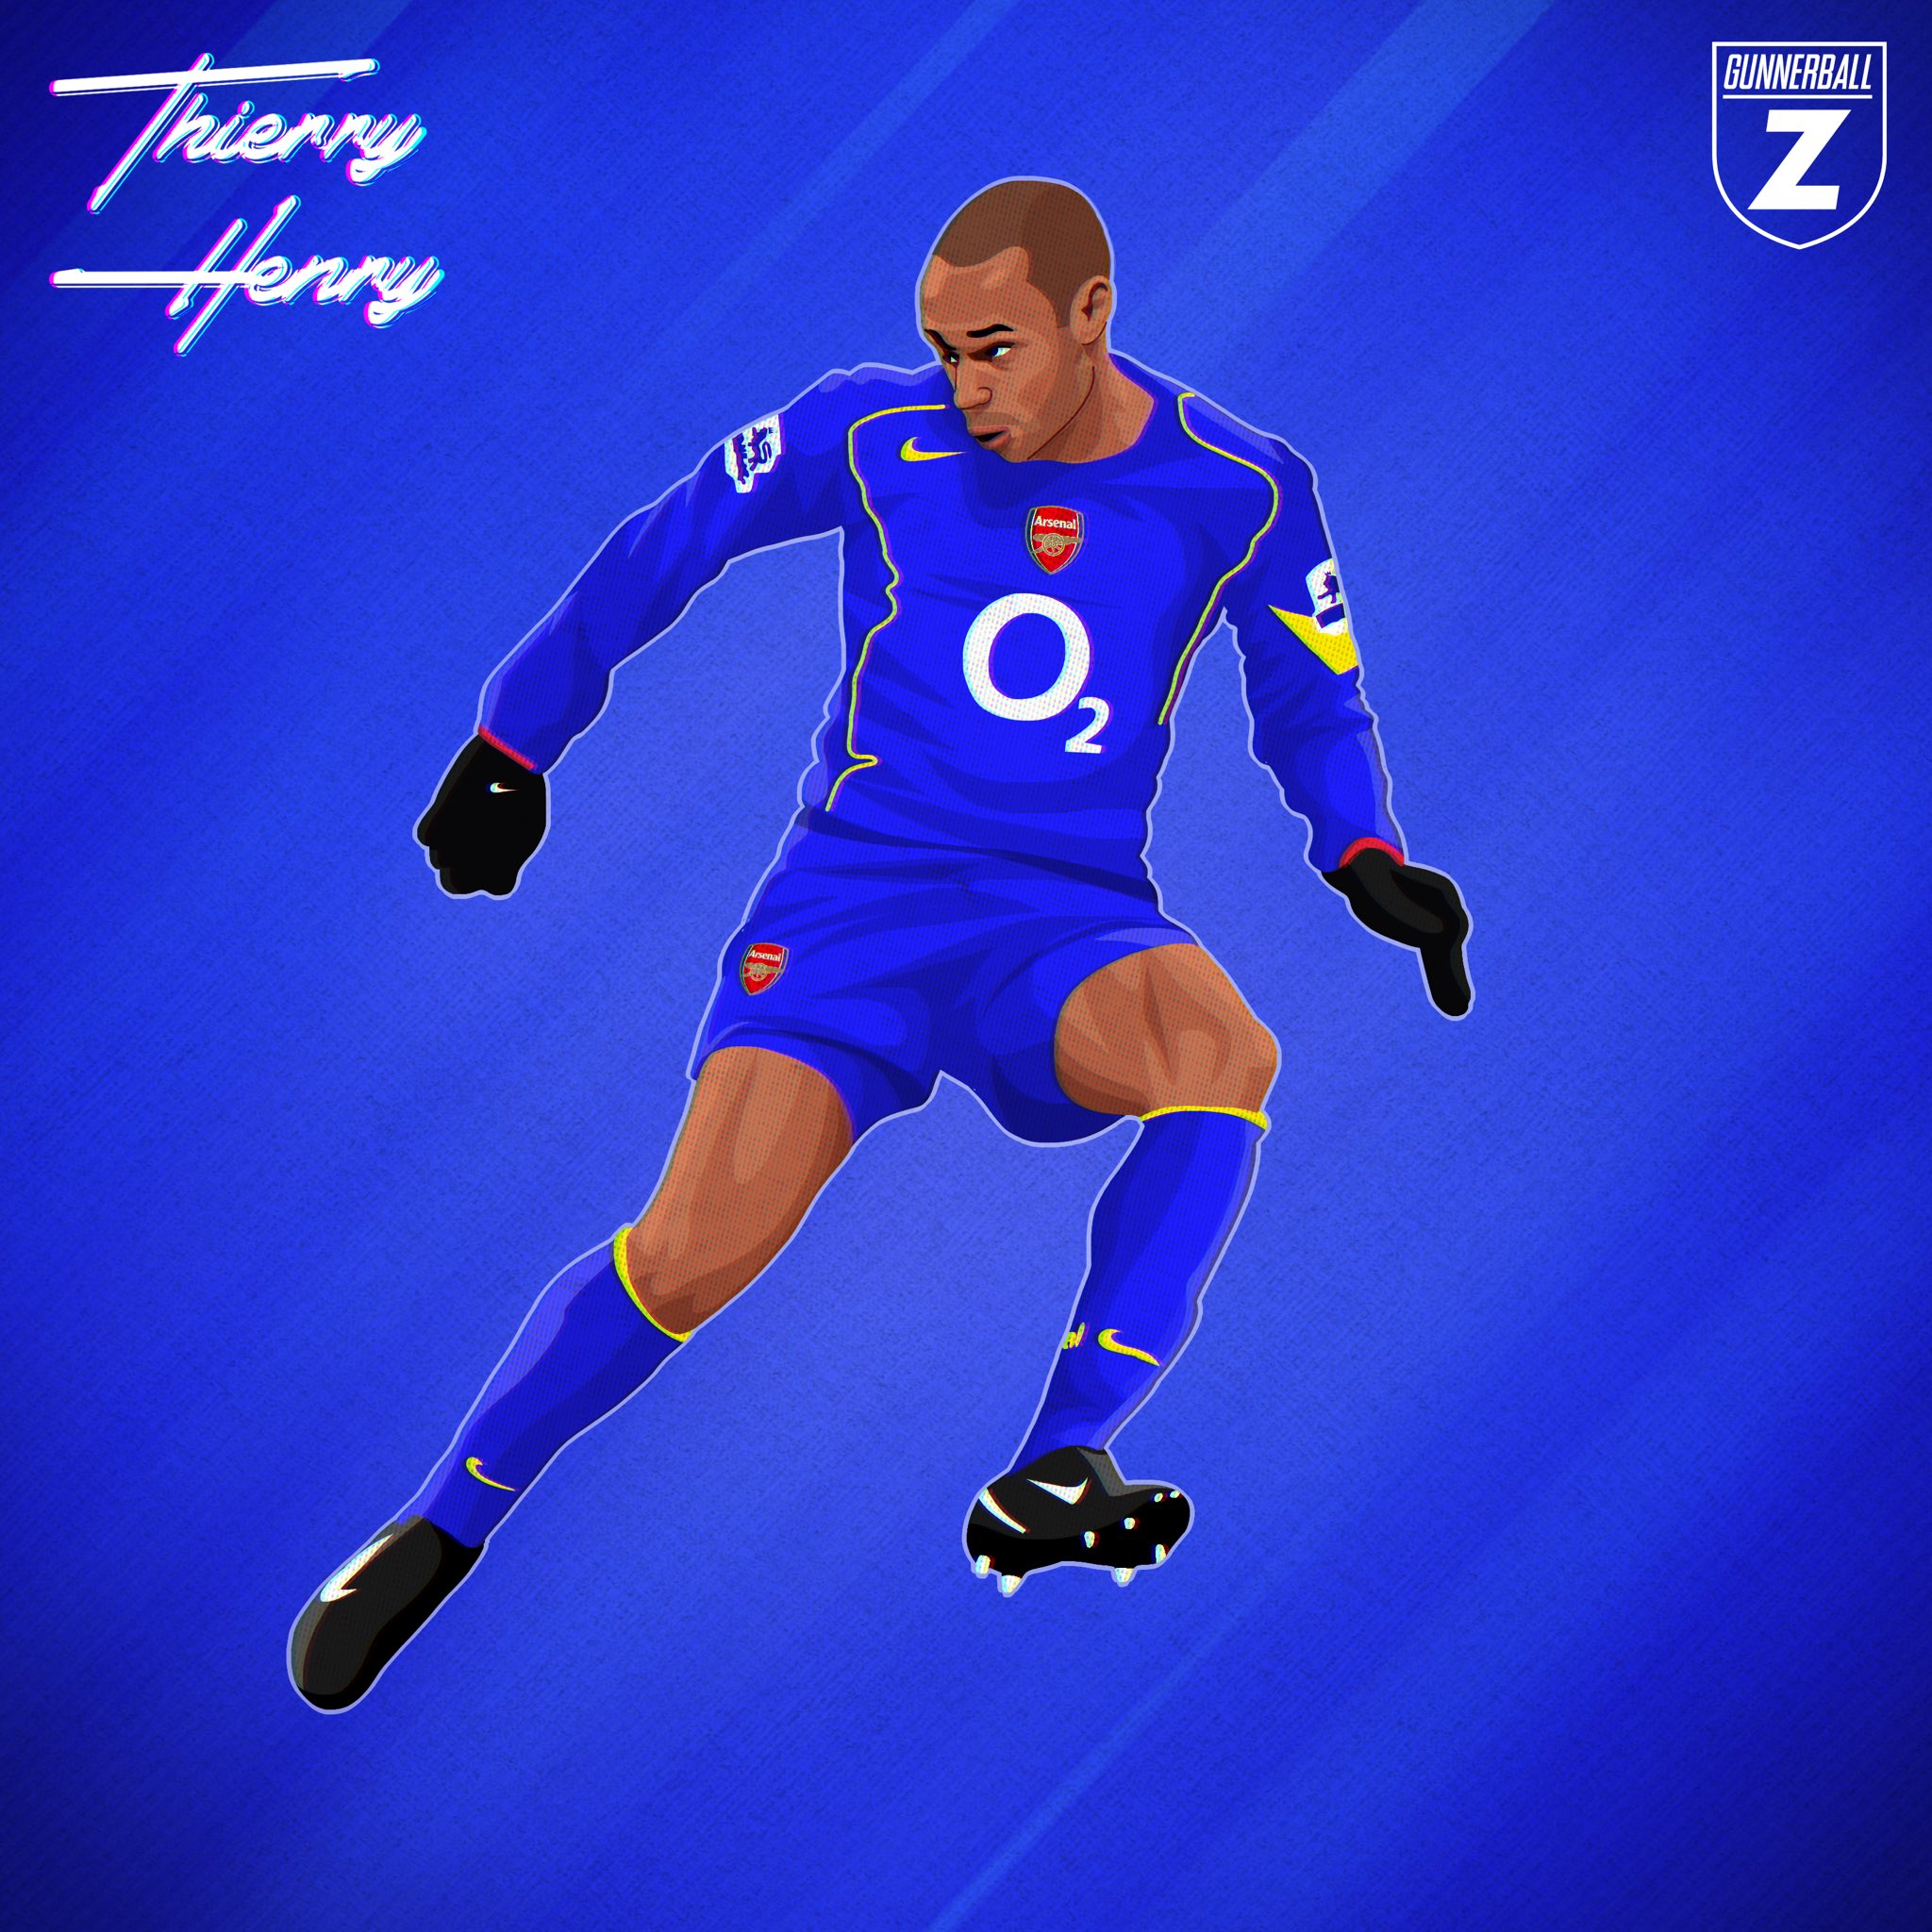 Thierry Henry 2004 Jersey | Photographic Print